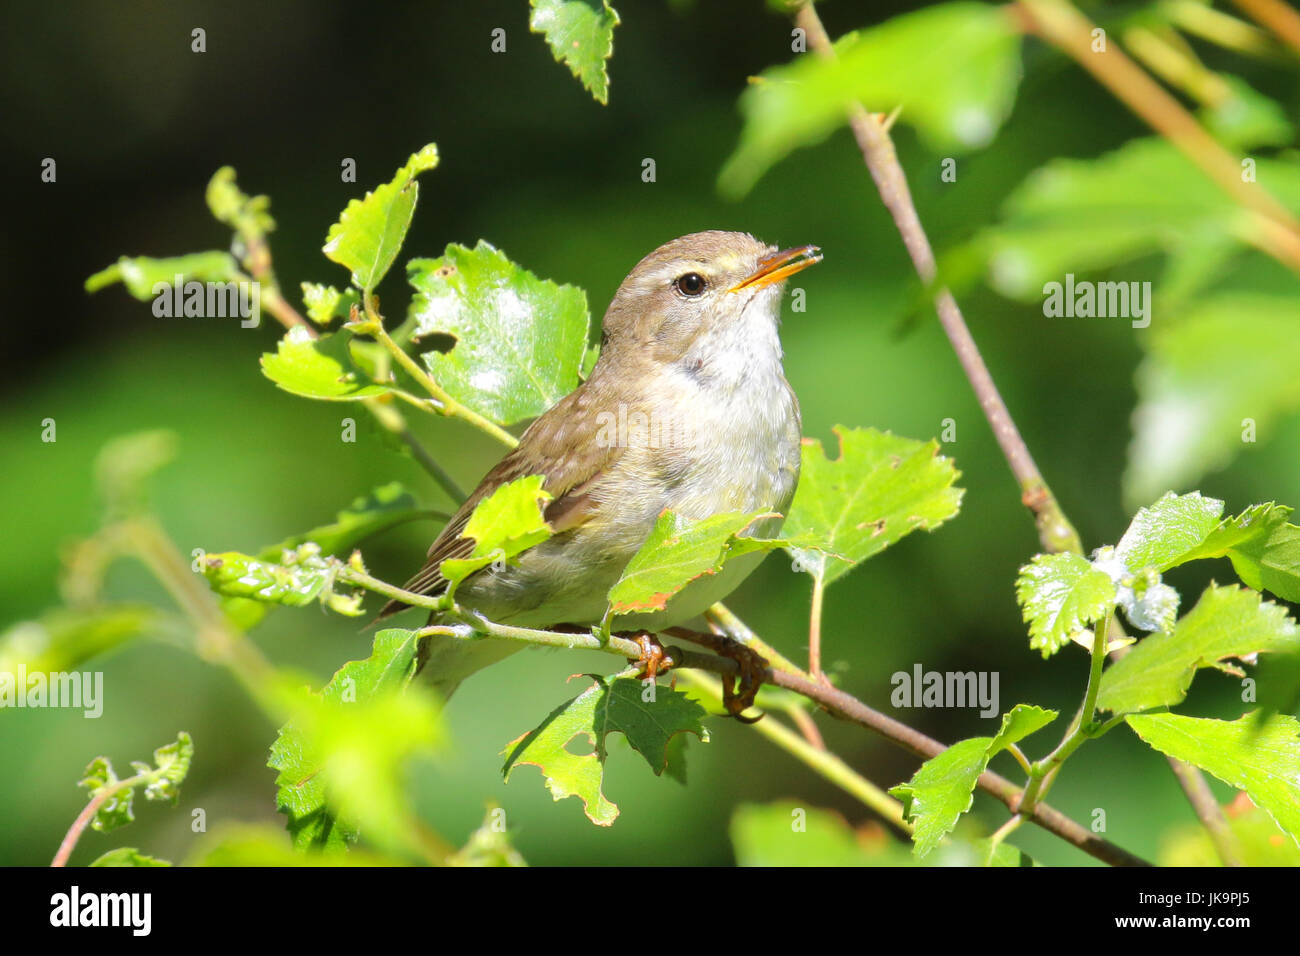 Willow warbler perched in a tree catching the sunlight Stock Photo